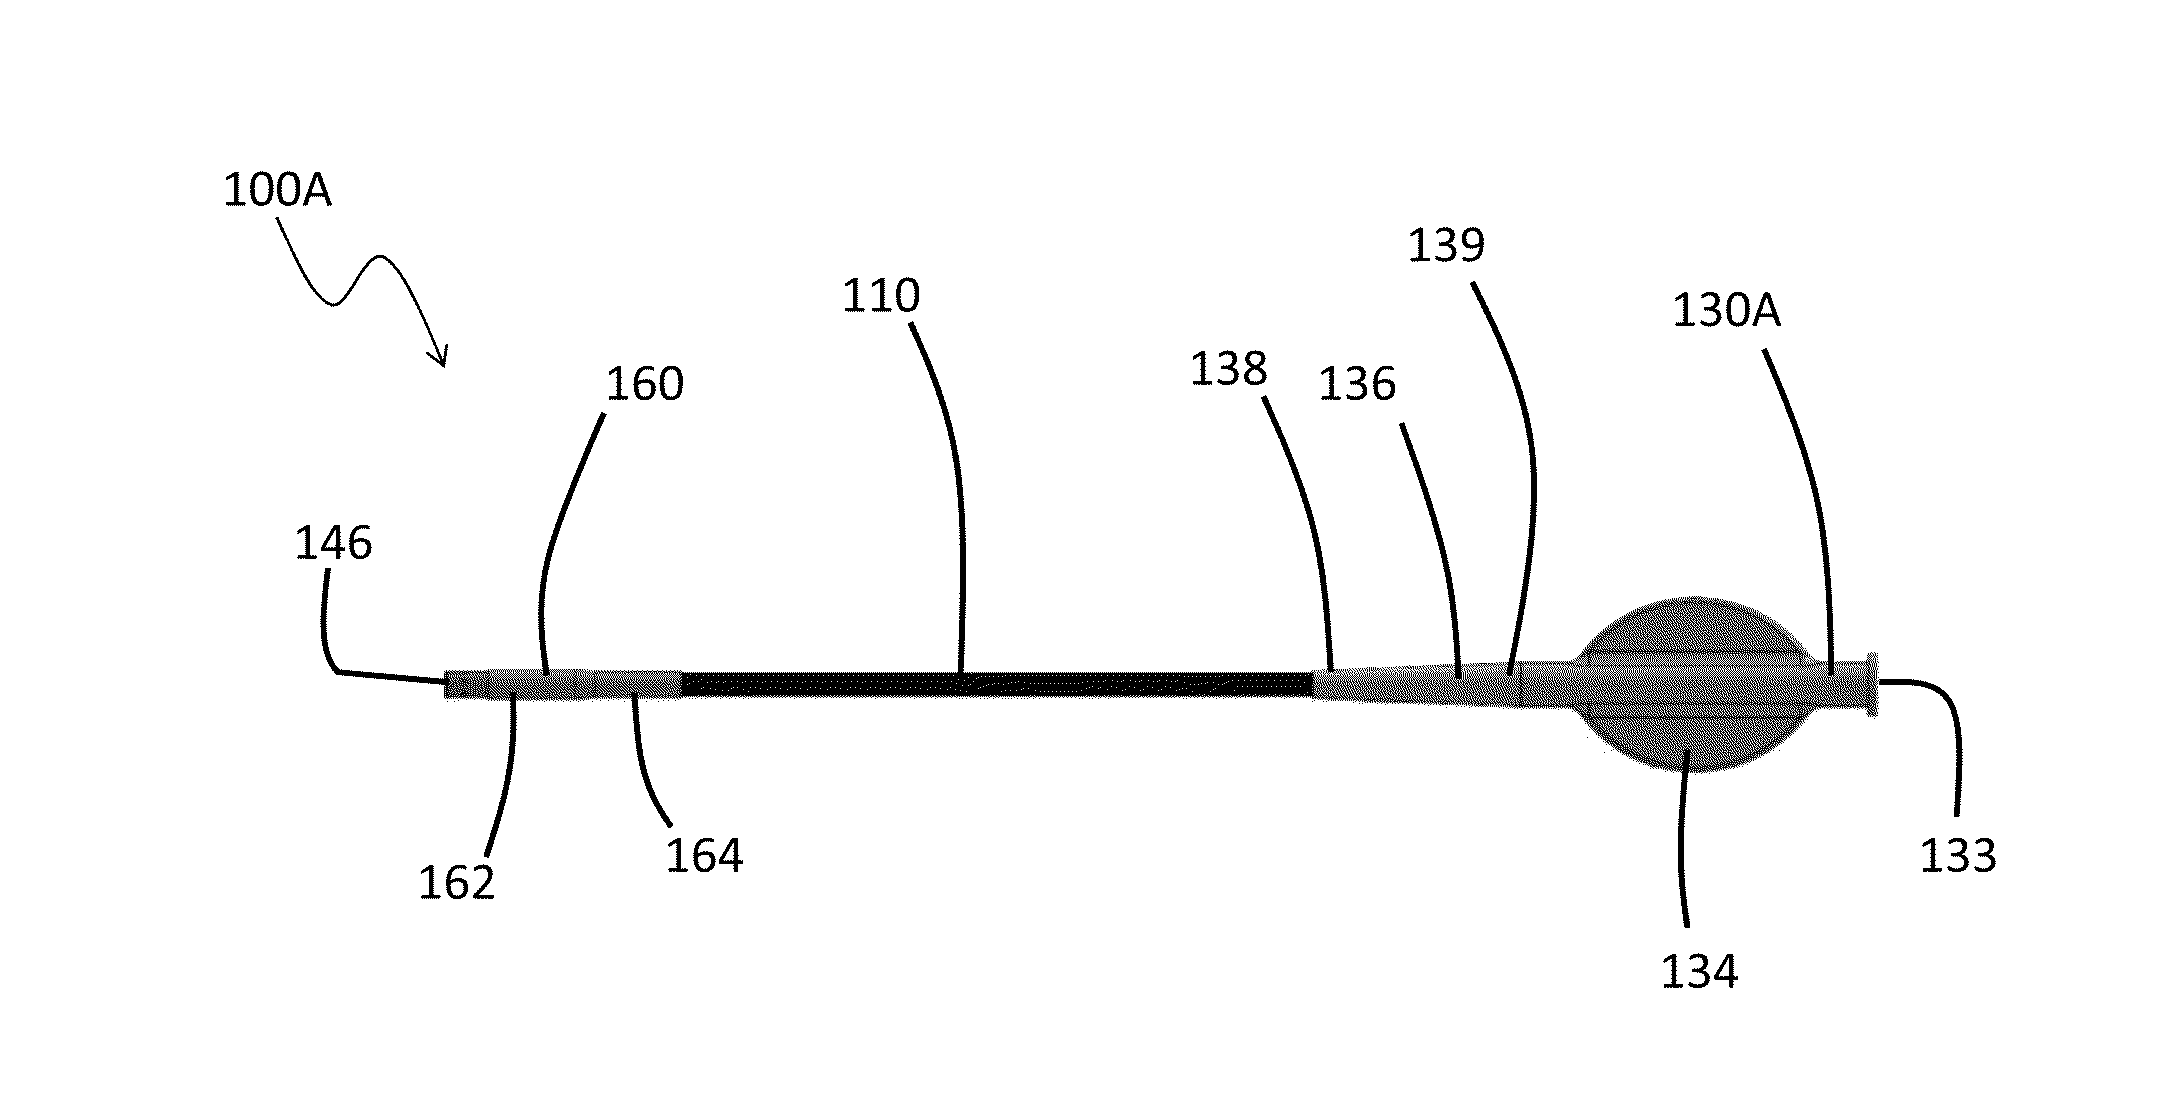 Catheter devices for crossing and treating an occlusion